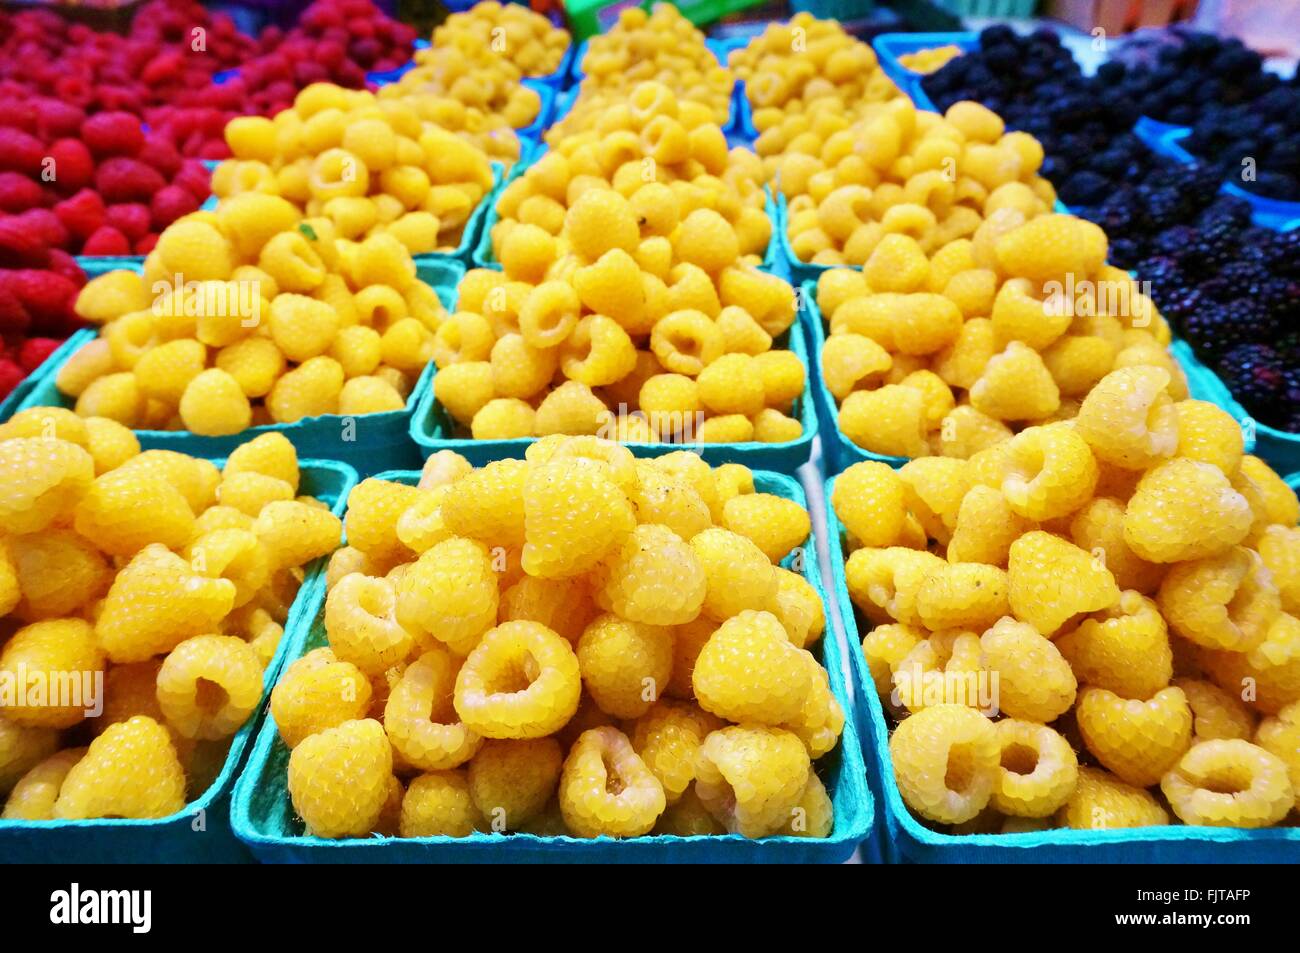 Golden yellow raspberries in containers at the market Stock Photo